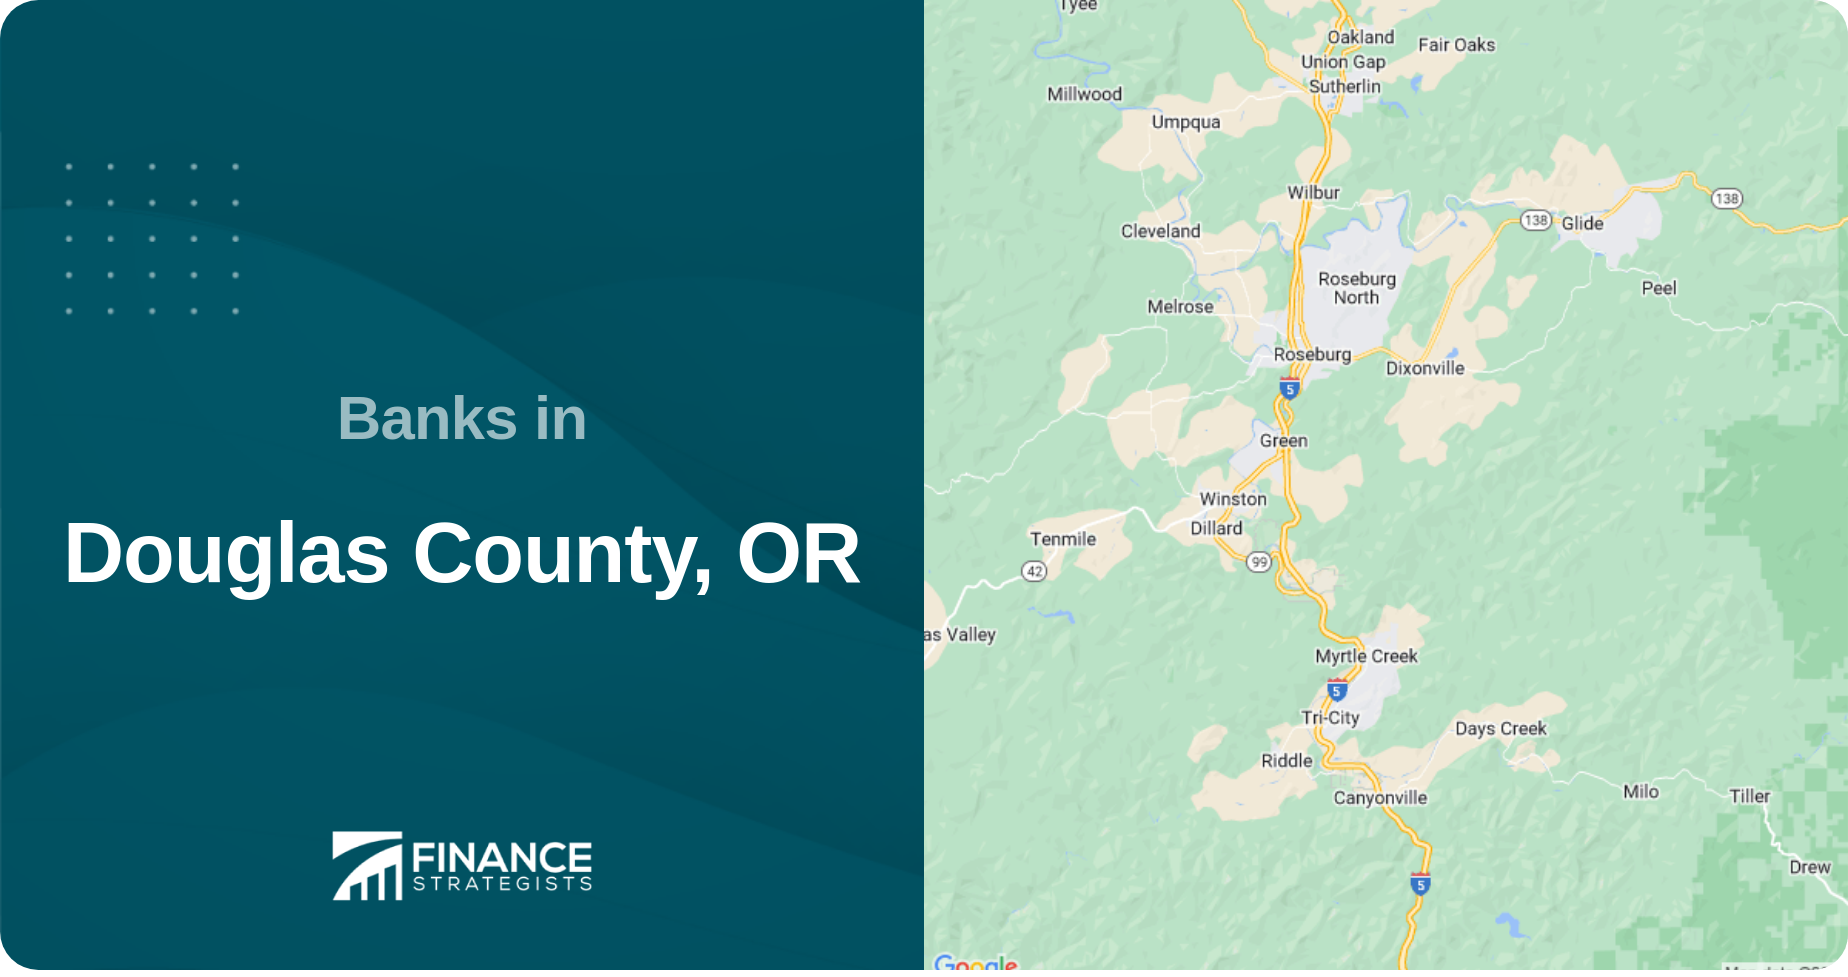 Banks in Douglas County, OR